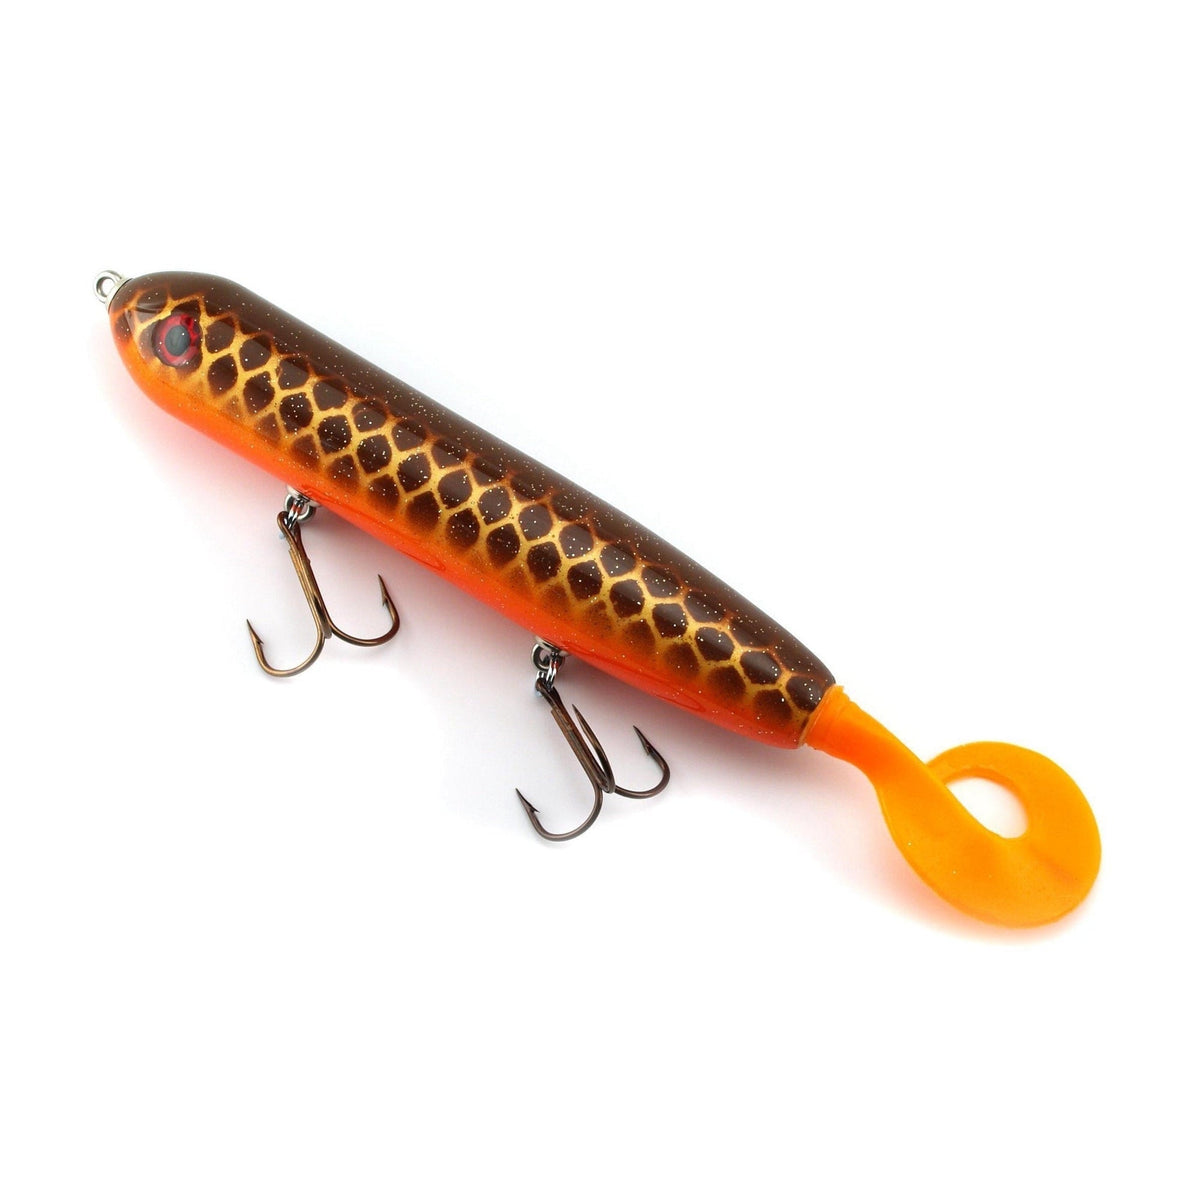 View of Jerk-Glide_Baits Suick Wabull Wild Action 8" Carp available at EZOKO Pike and Musky Shop